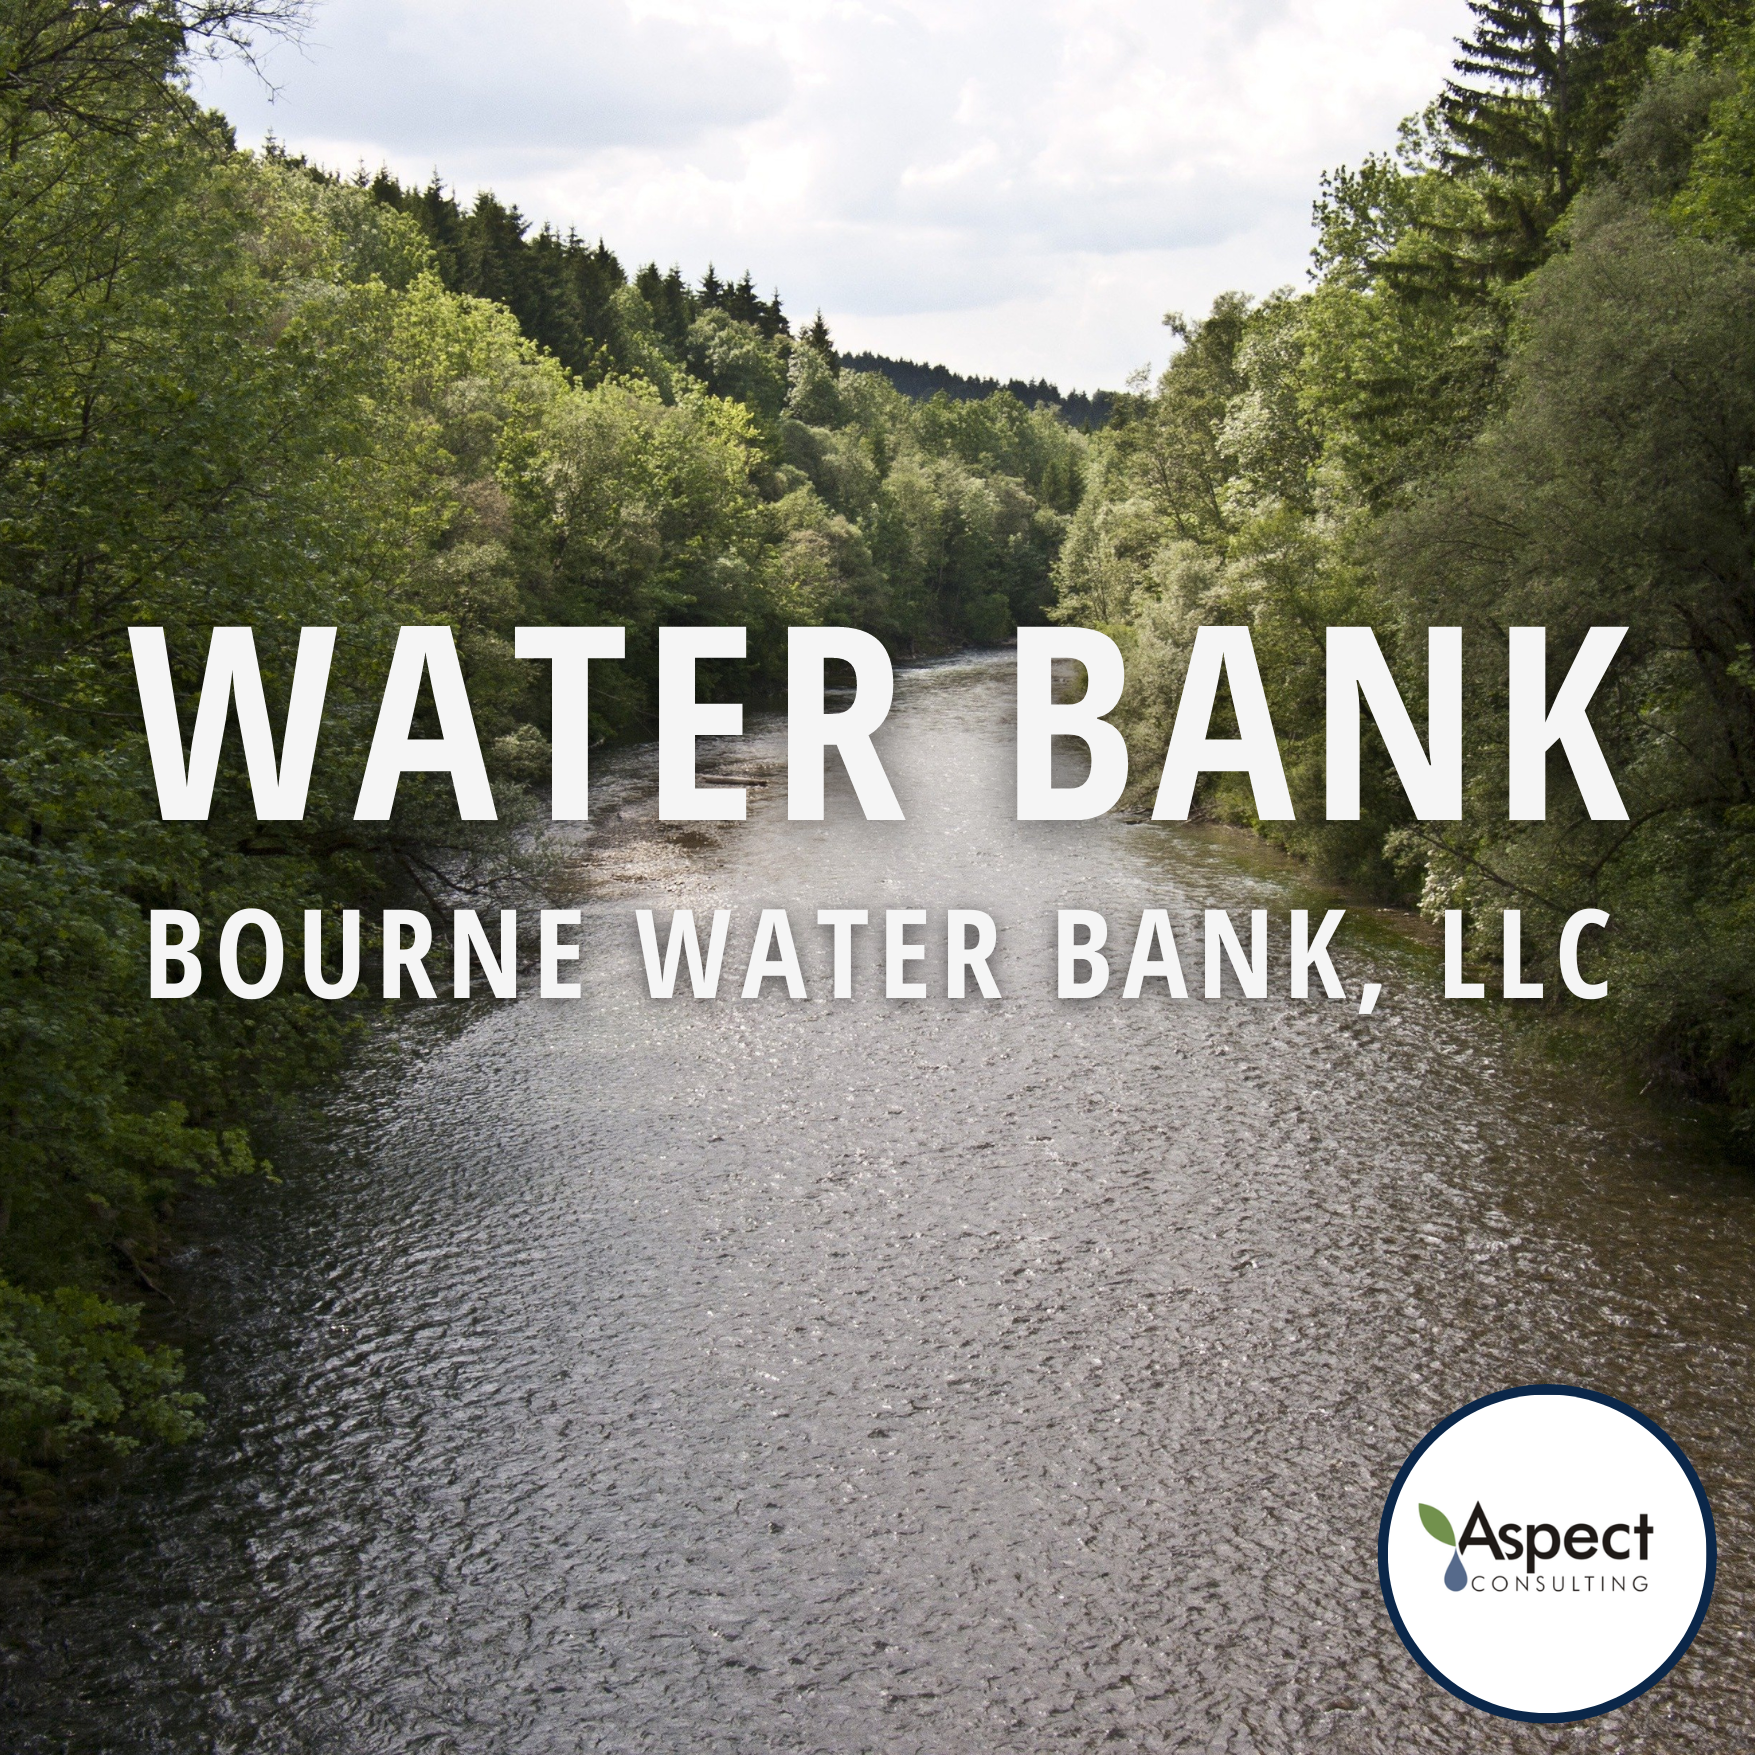 Bourne Water Bank - Aspect Consulting